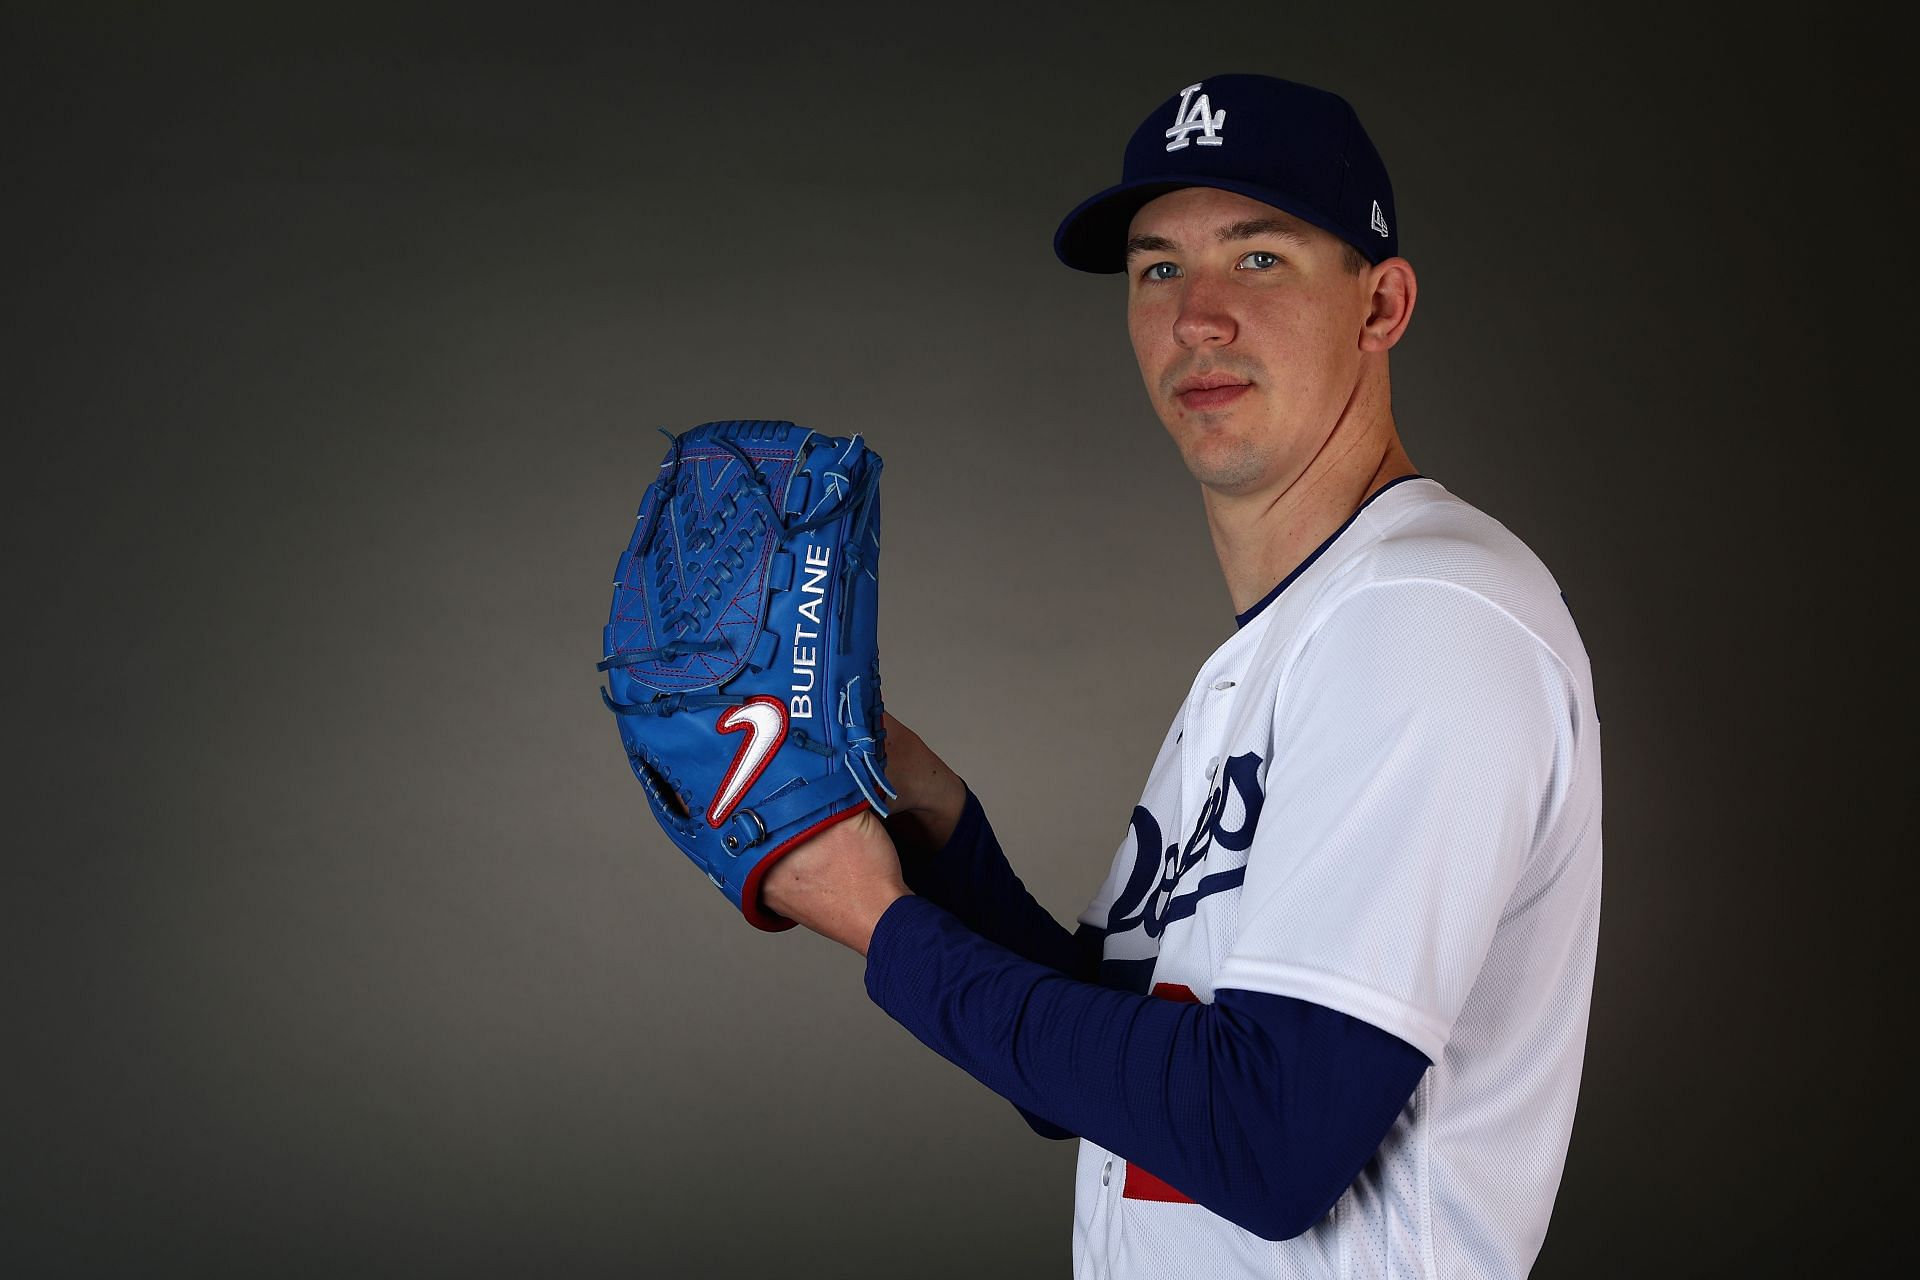 LA Dodgers&rsquo; GM Brandon Gomes has shed some light on Walker Buehler&rsquo;s possible return to the baseball field.